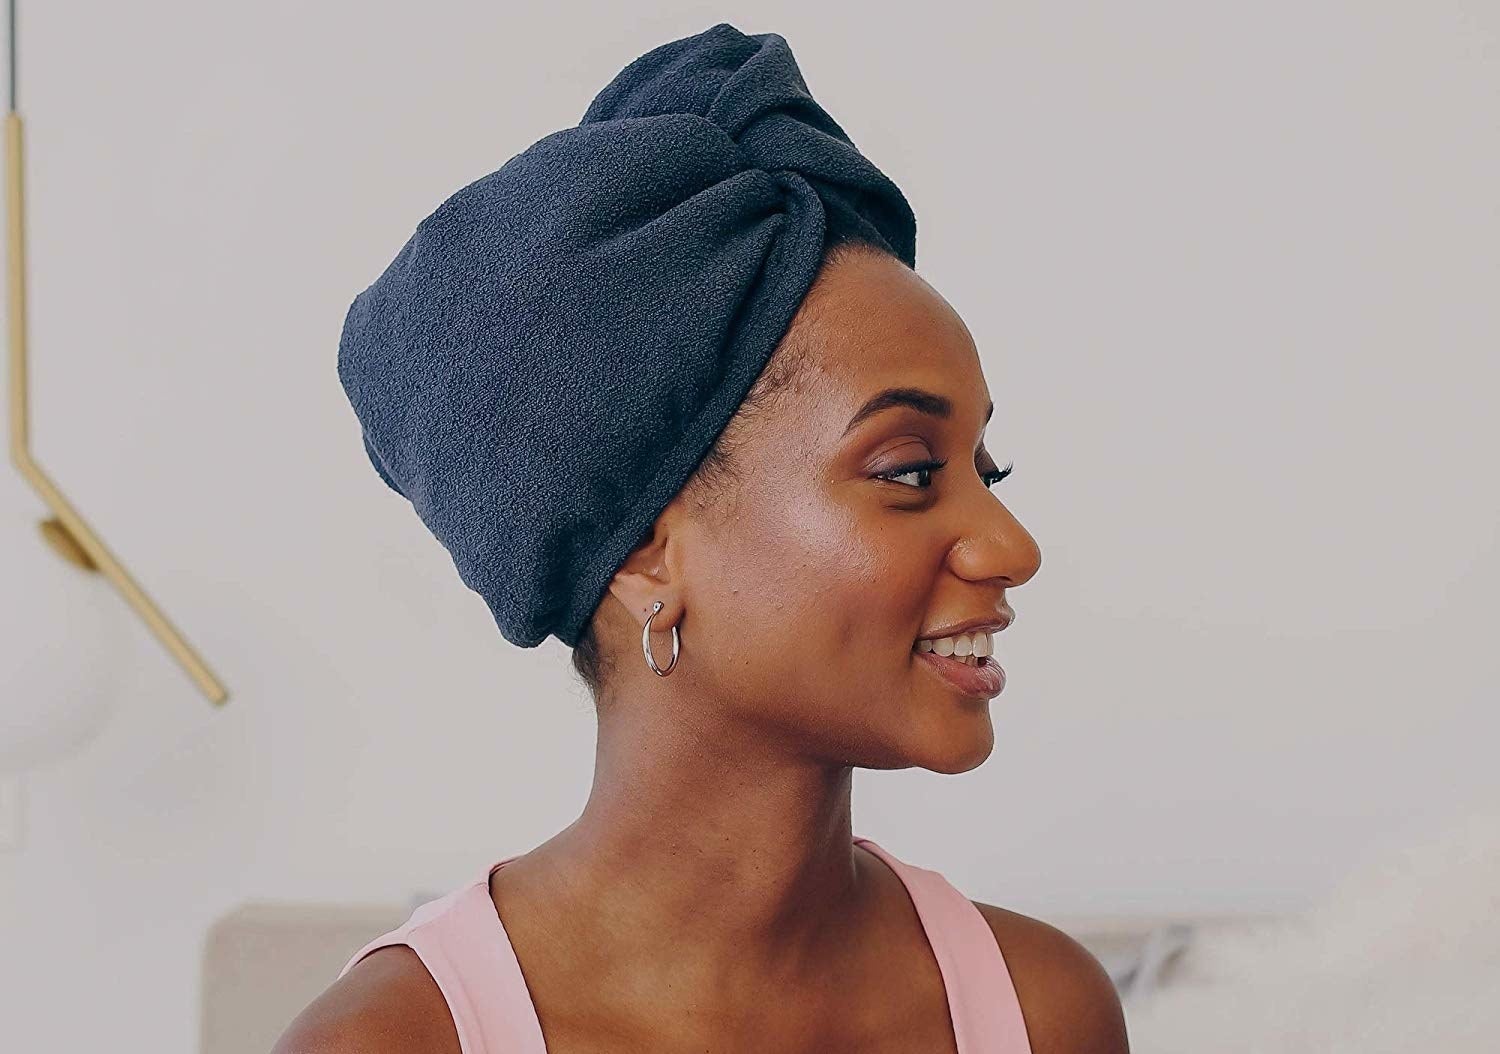 A model wearing a navy blue wrap on their head